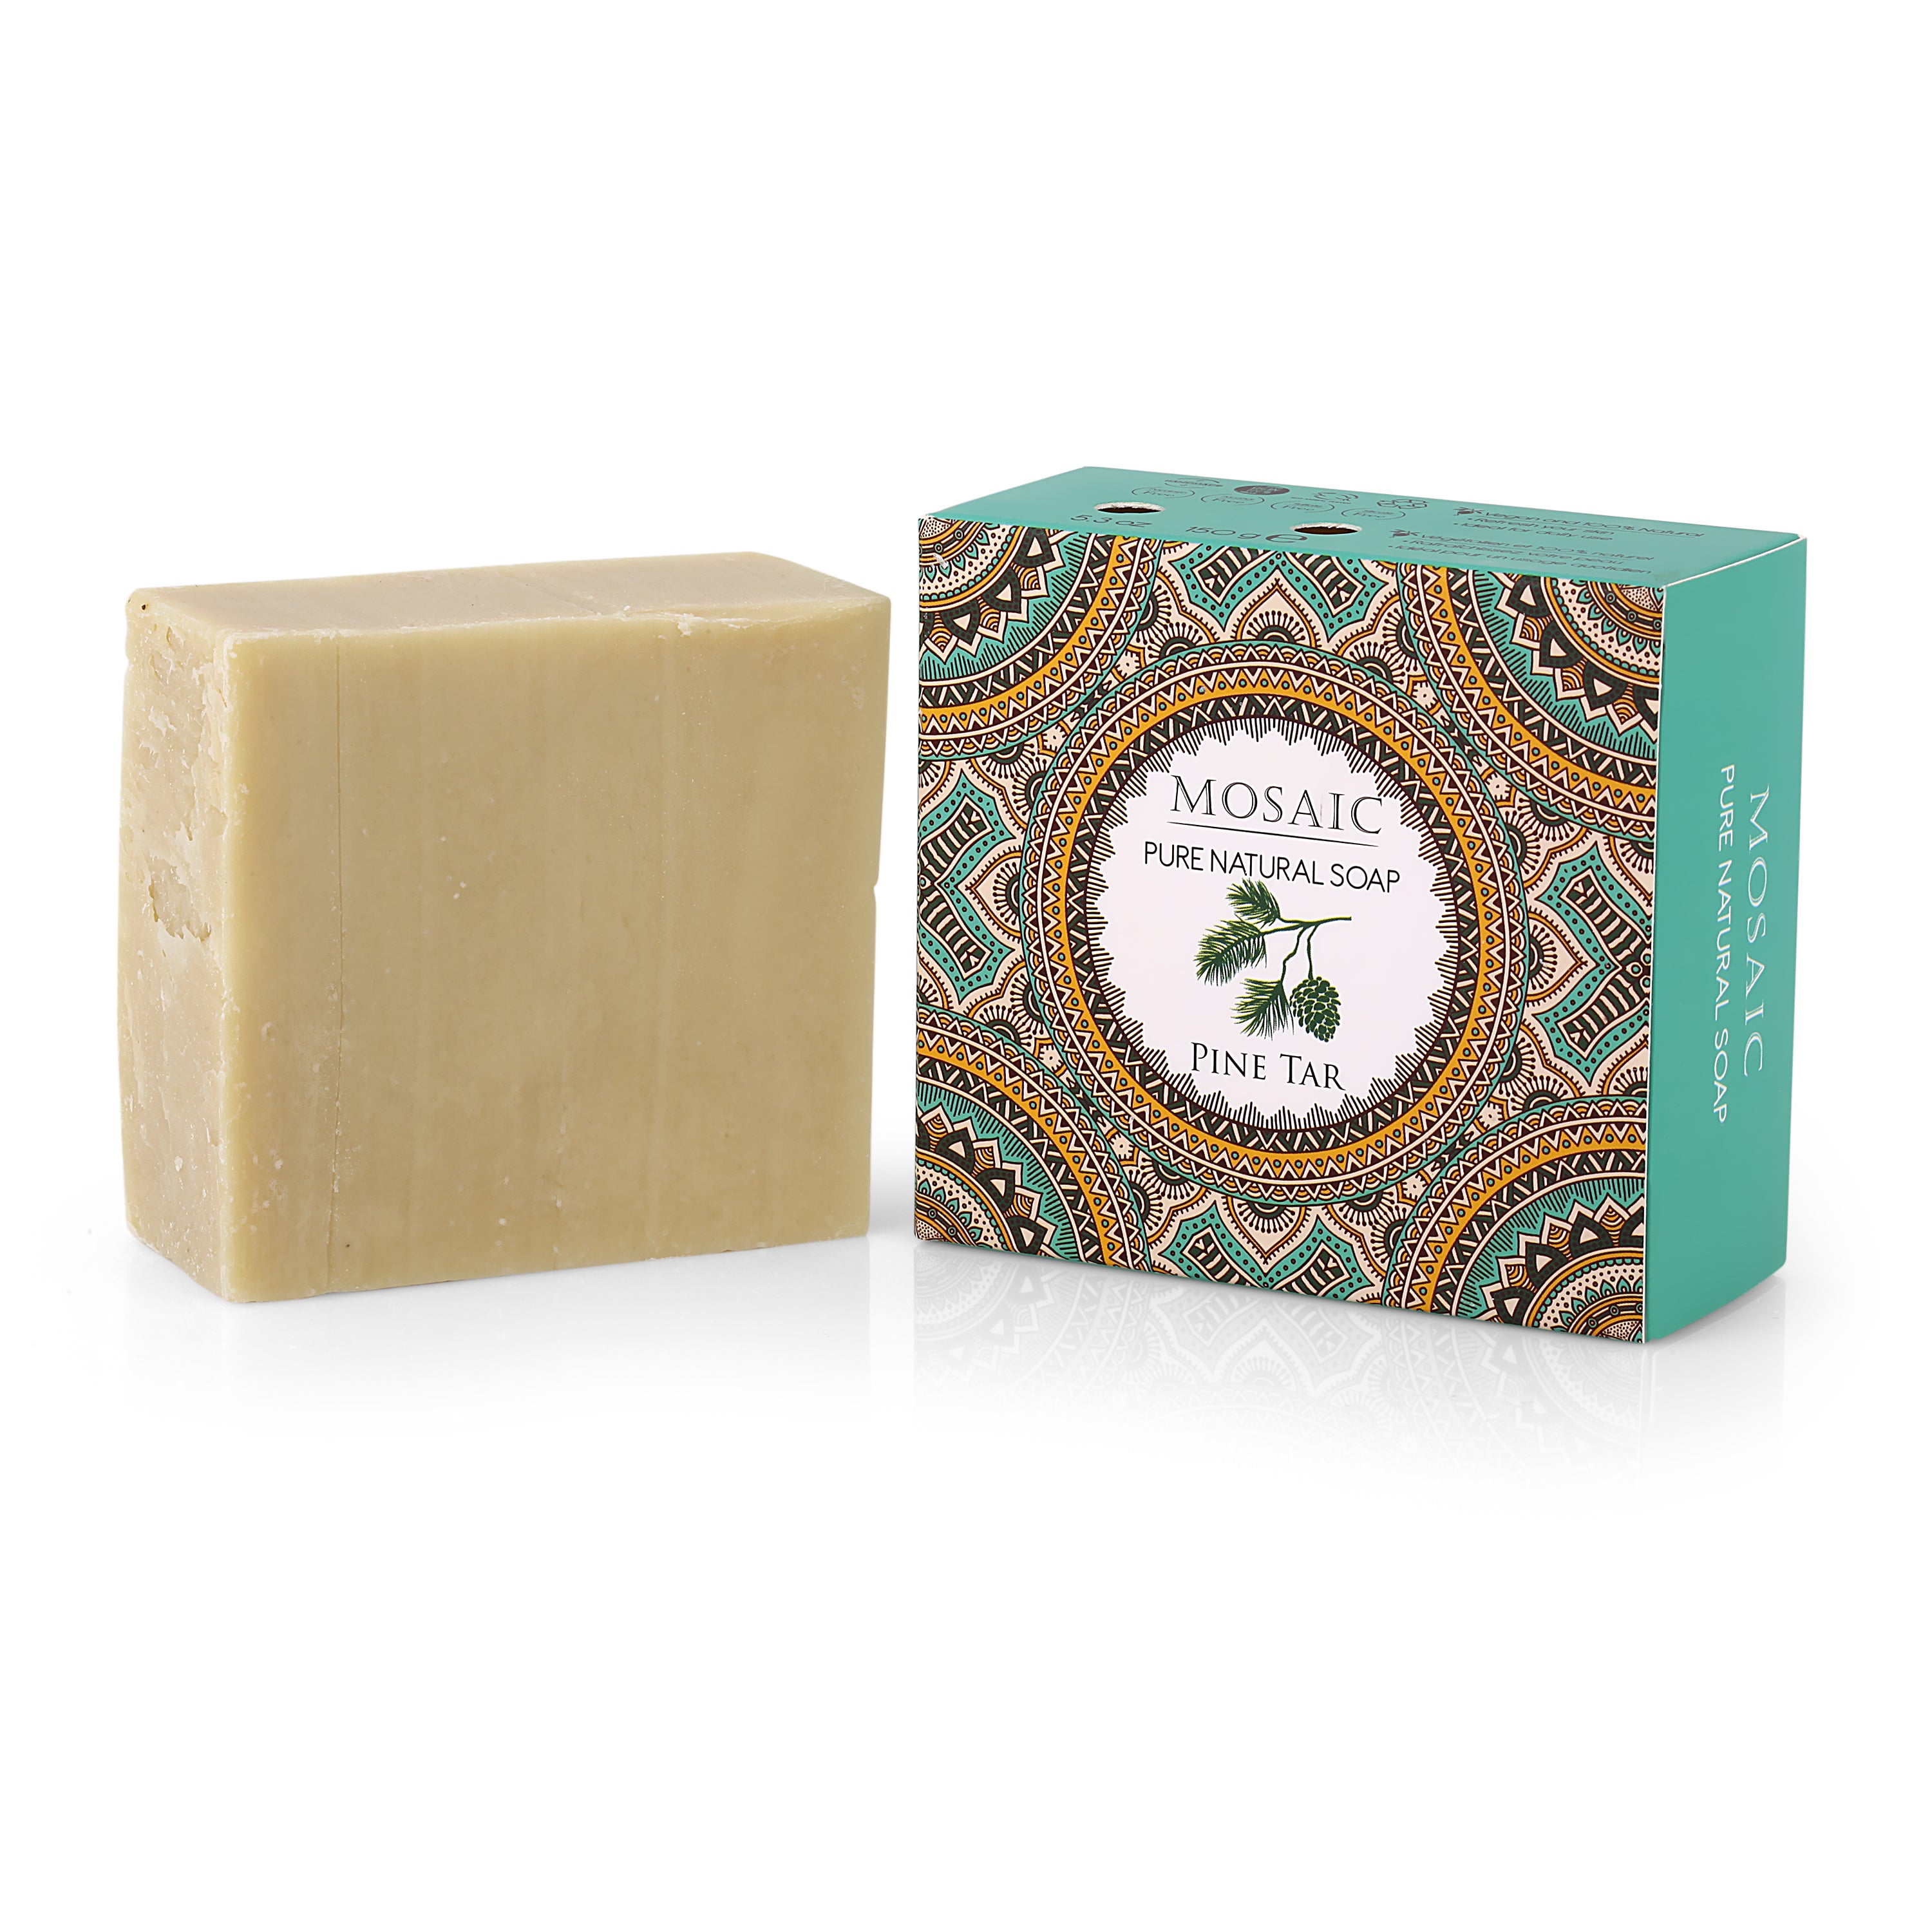 Pine Tar Beauty Soap with Olive Oil, 5.3 oz